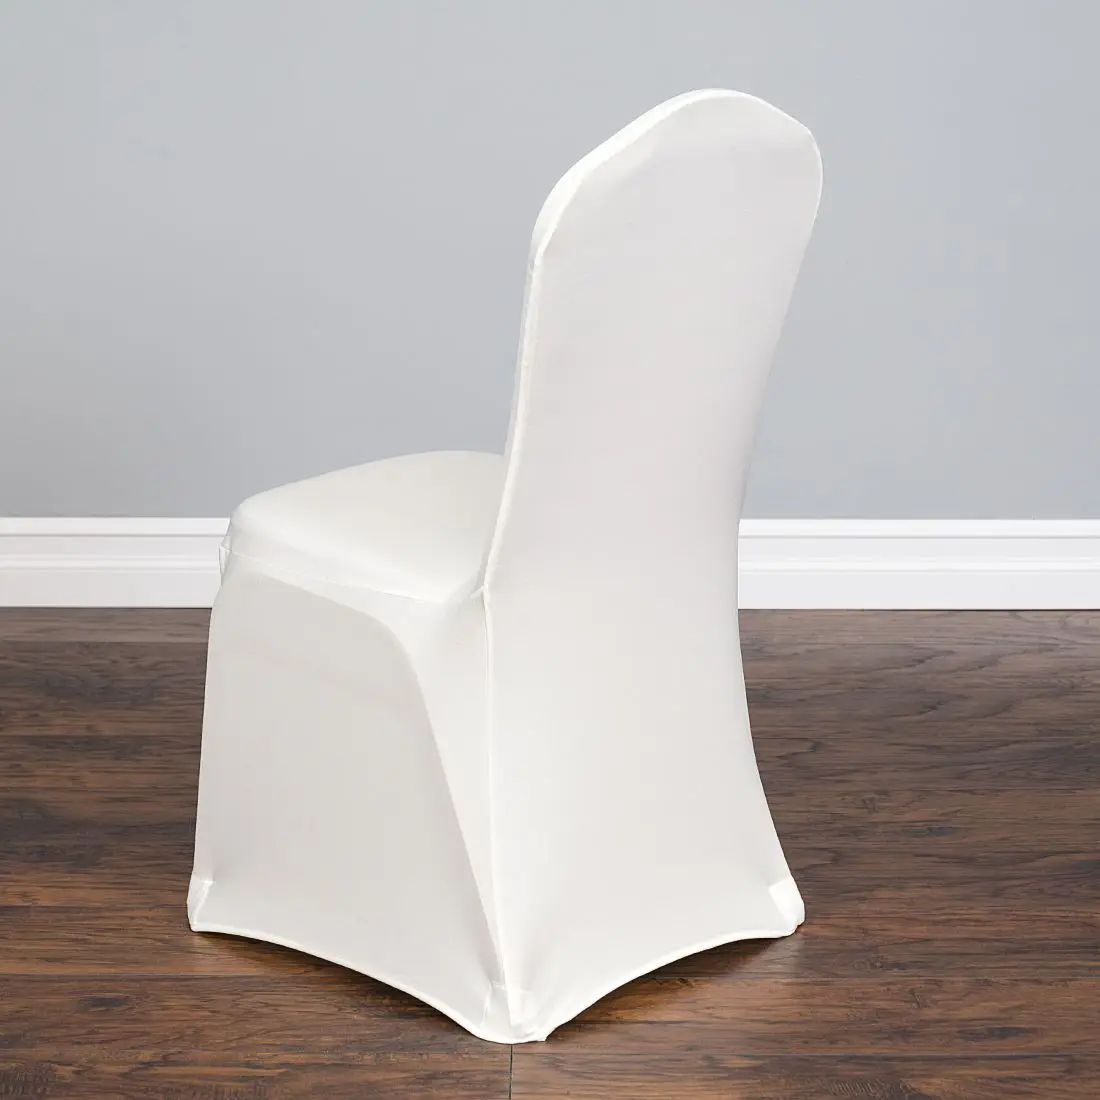 Professional produce stretch banquet wedding spandex chair cover